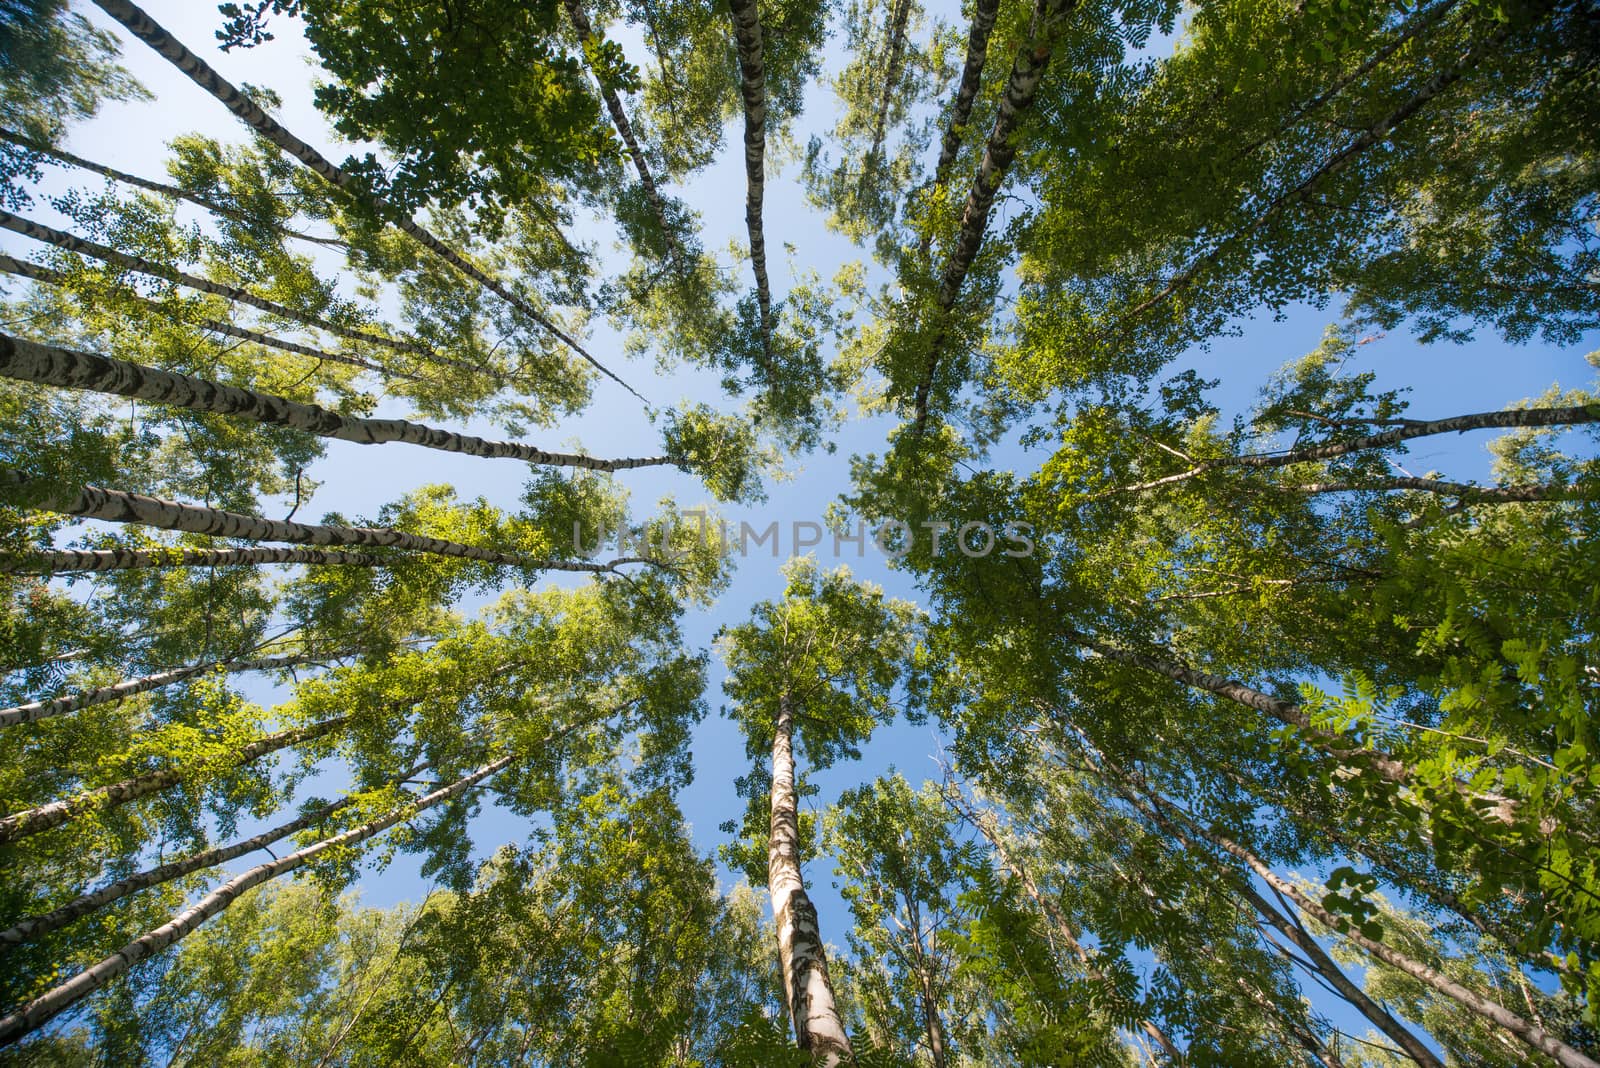 Looking up in Forest - Green Tree branches nature abstract background by skrotov